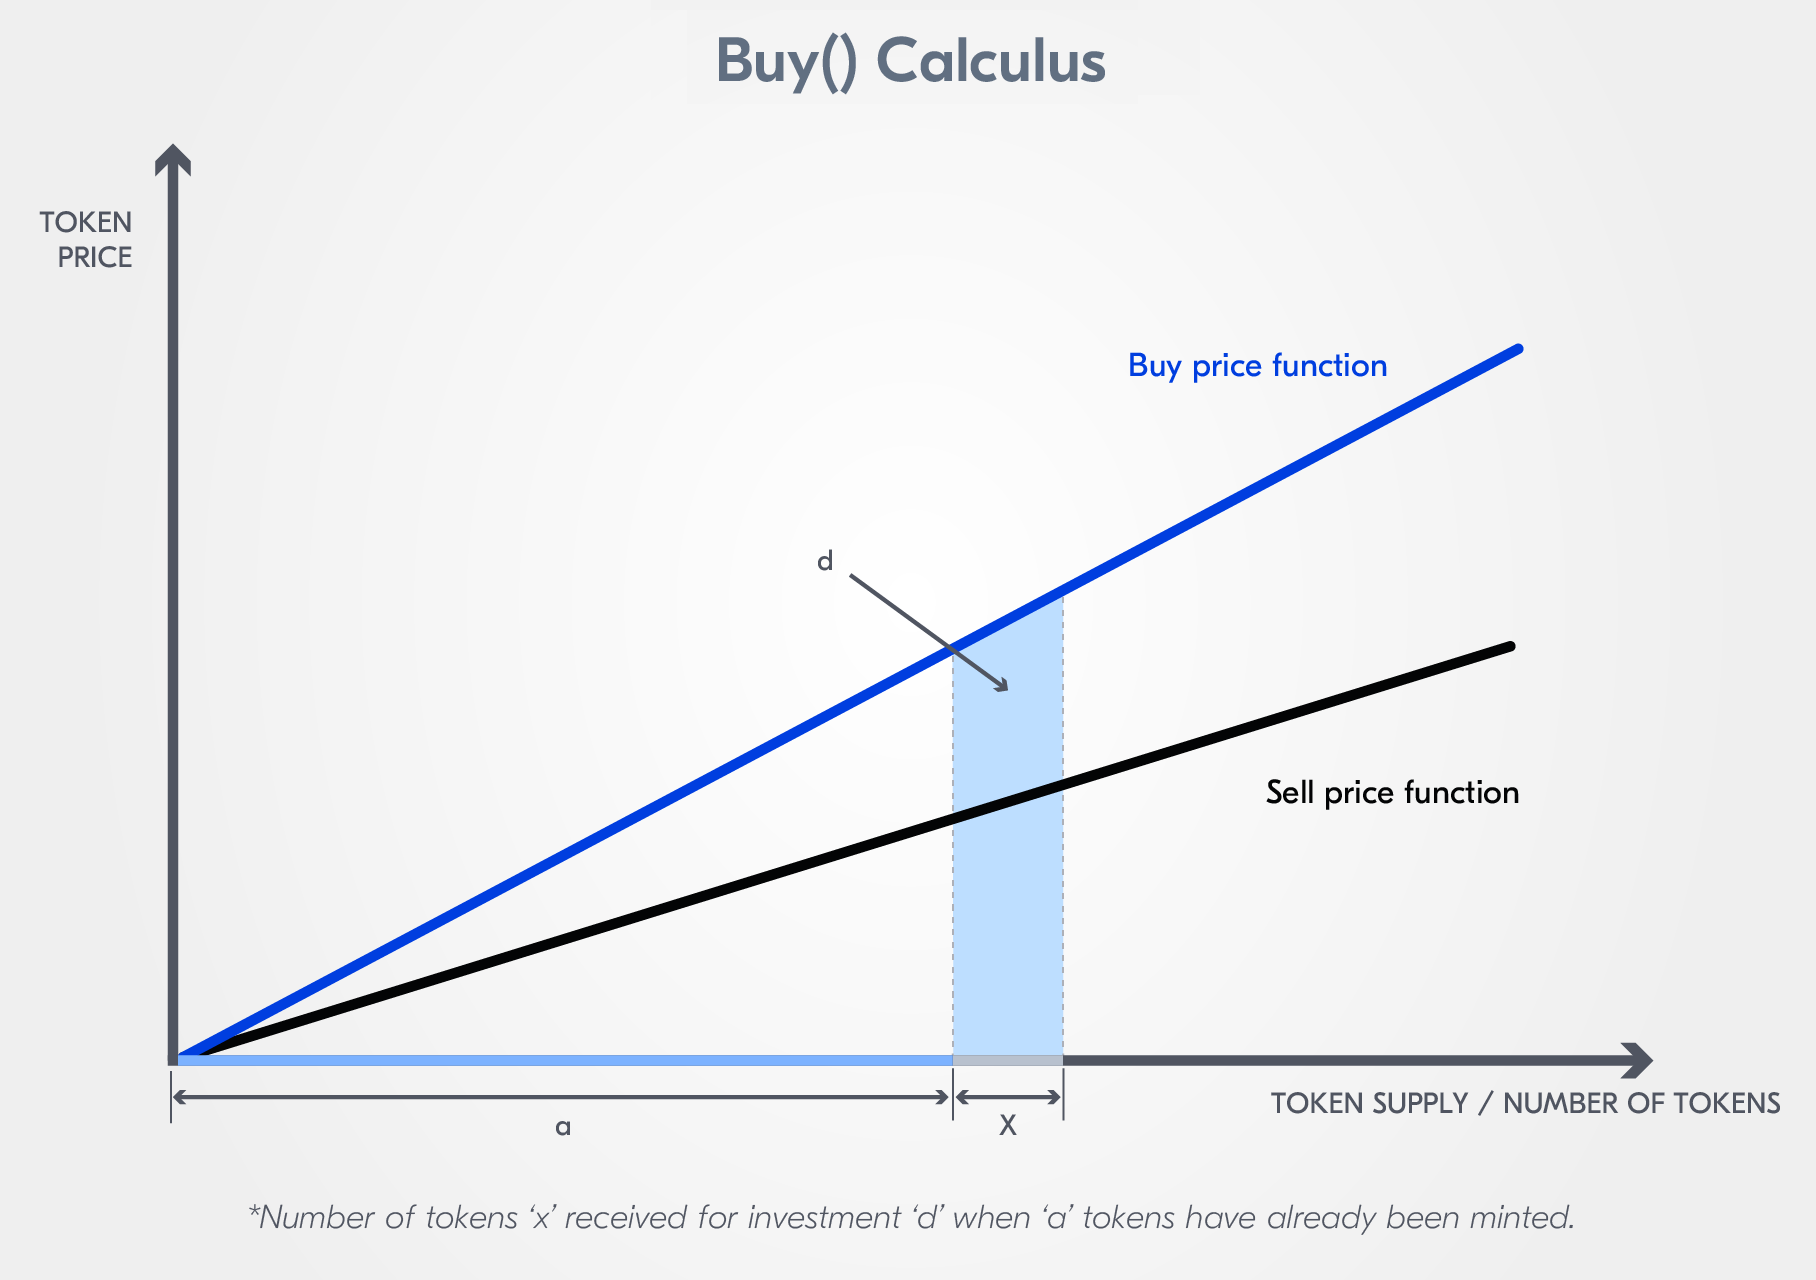 Calculating the buy price post-MFG